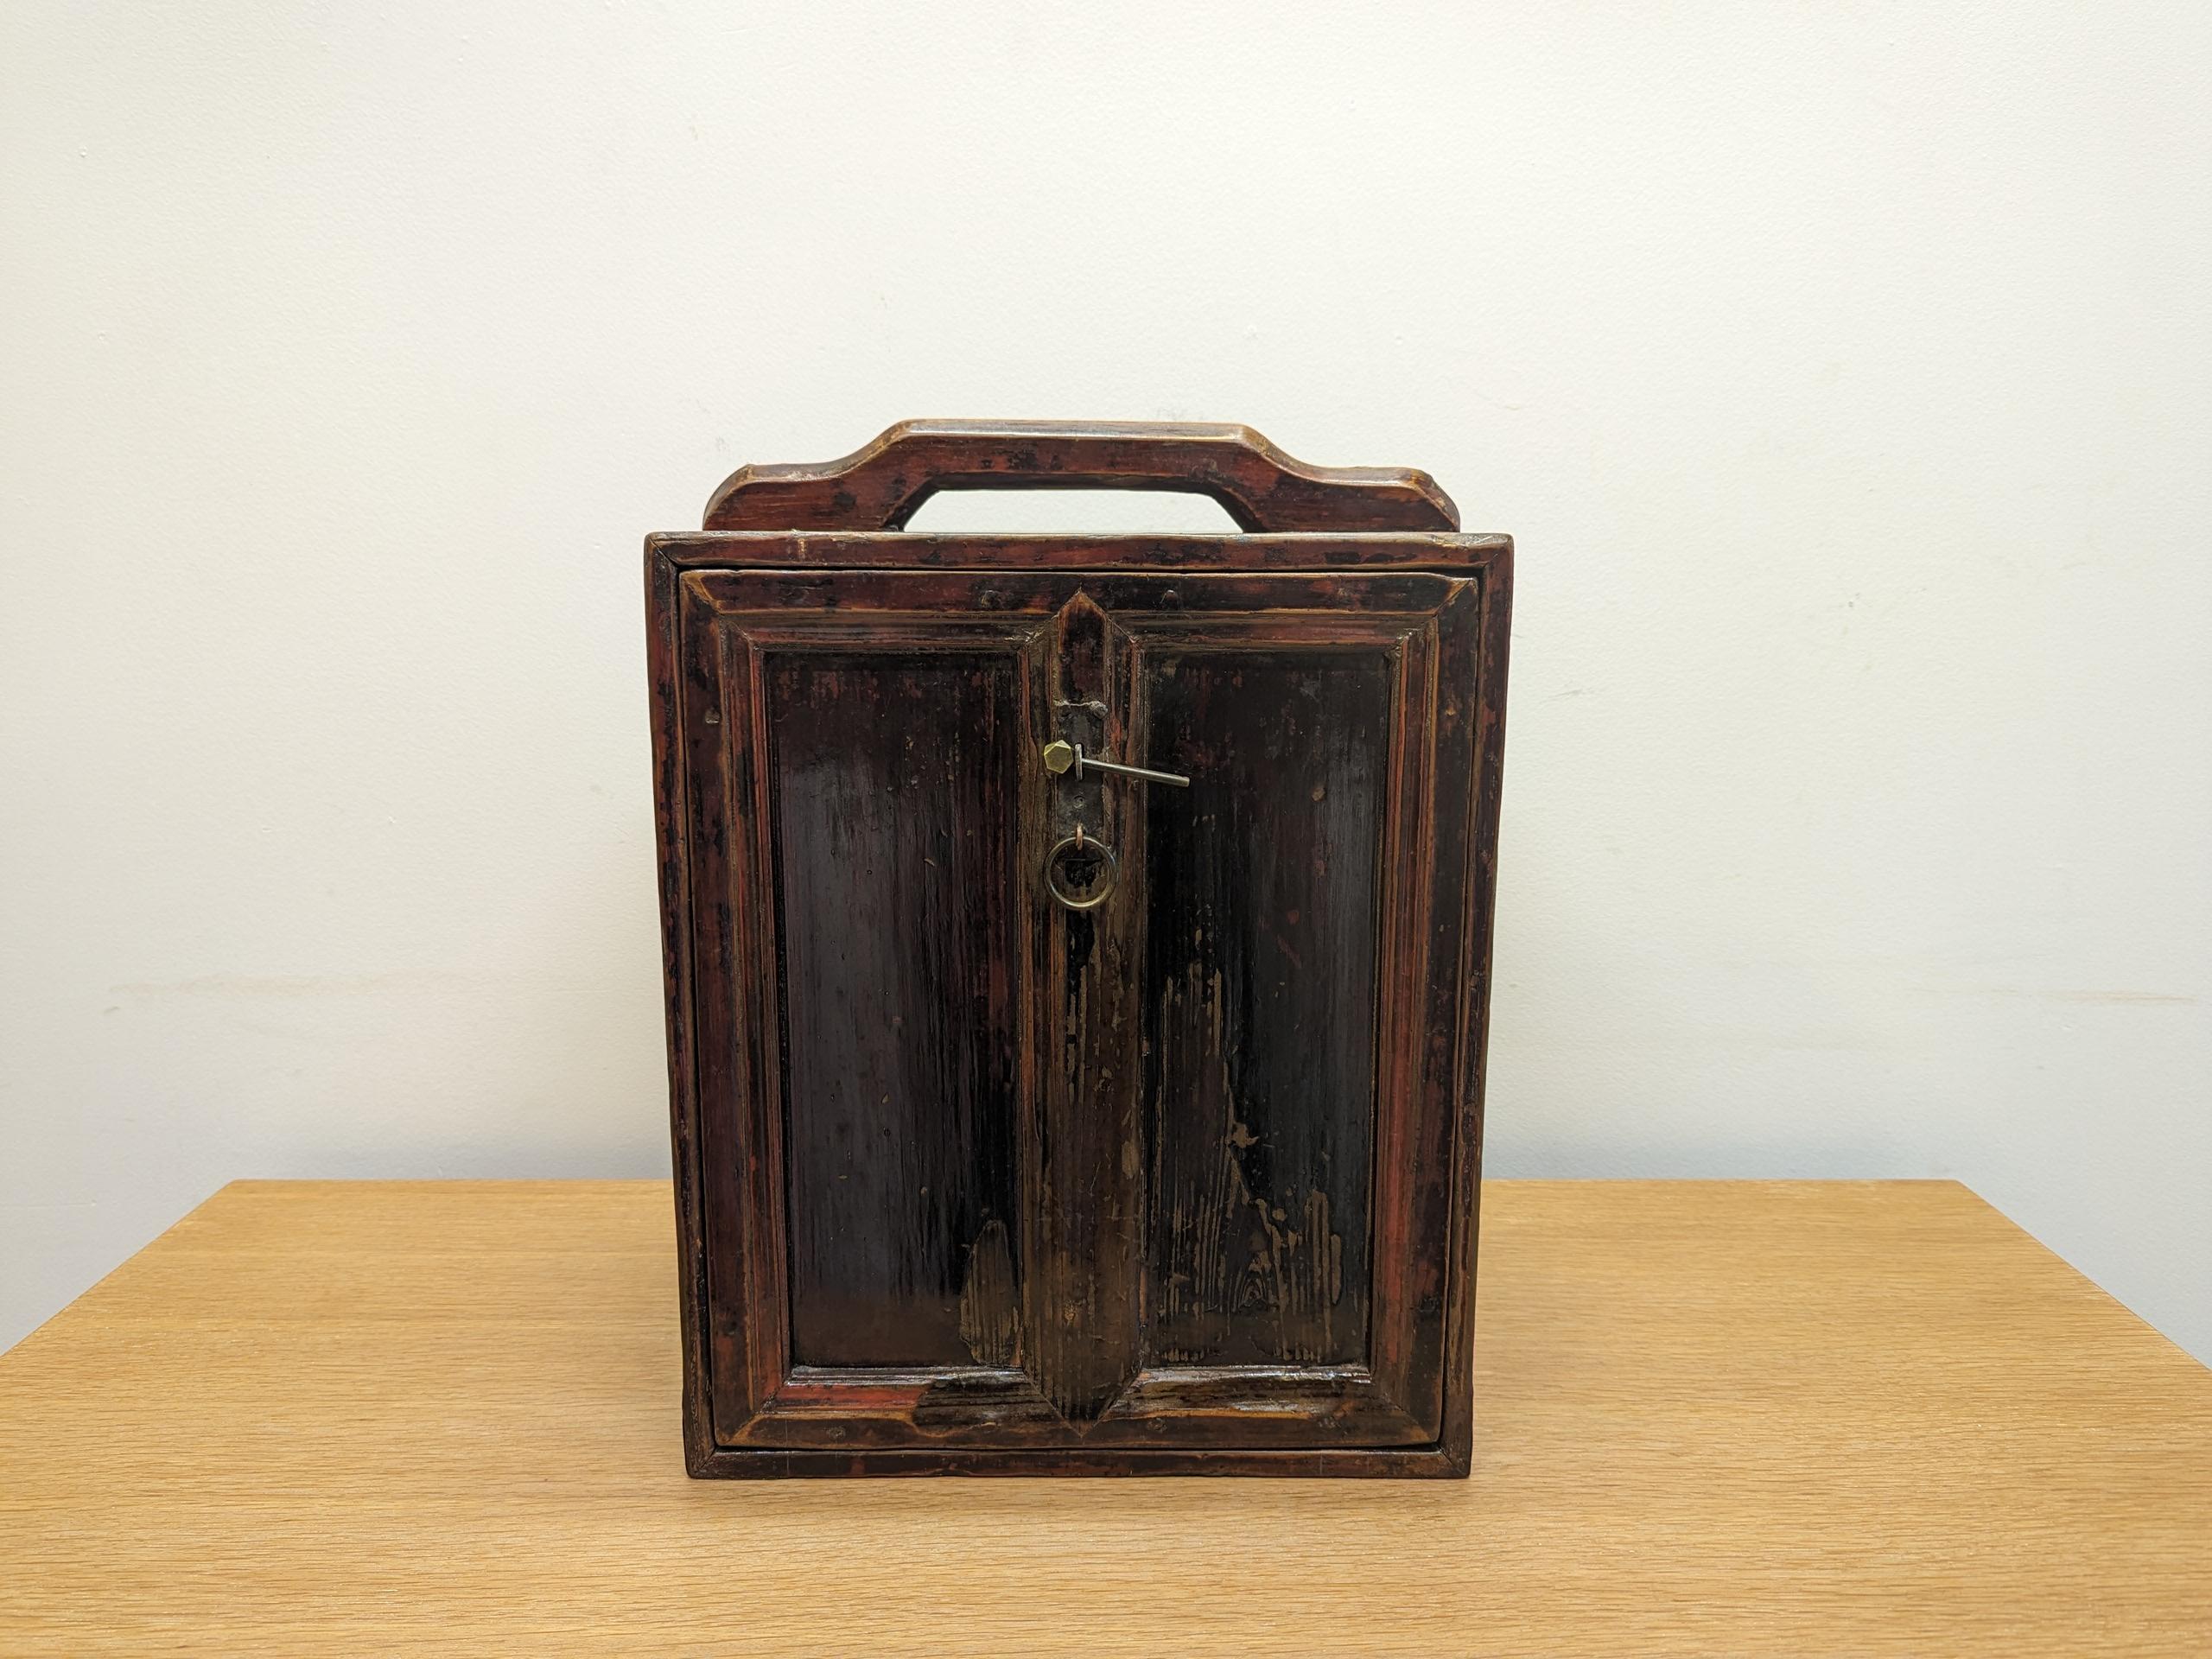 19th Century Apothecary Box Case.  Chinese Antique Apothecary Doctors Case.   Composed of elm wood and pine, this case has seven drawers with brass pulls.  Each drawer has a curtain motif carving on the face plate, which represents special contents